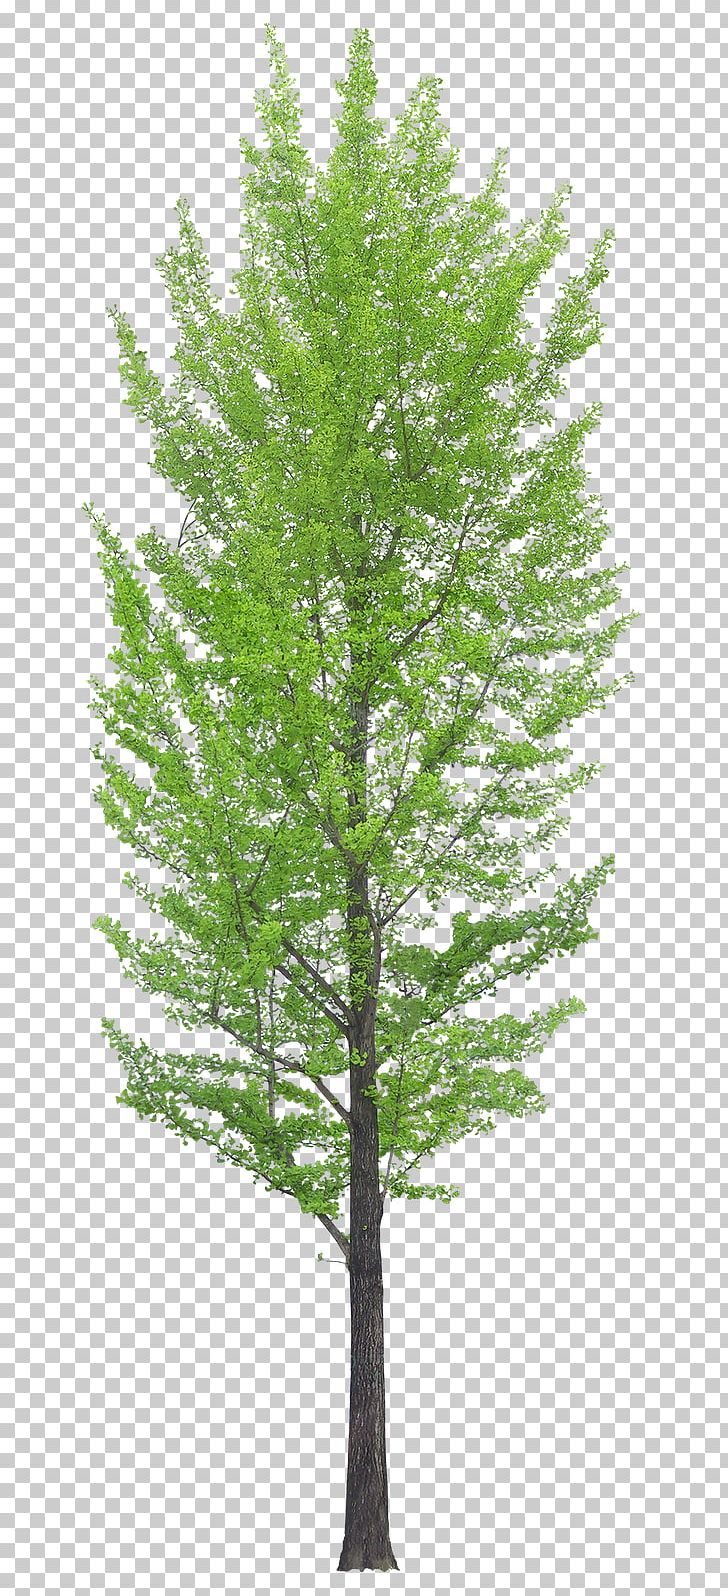 Tree PNG, Clipart, Biome, Branch, Computer Icons, Conifer, Evergreen Free PNG Download